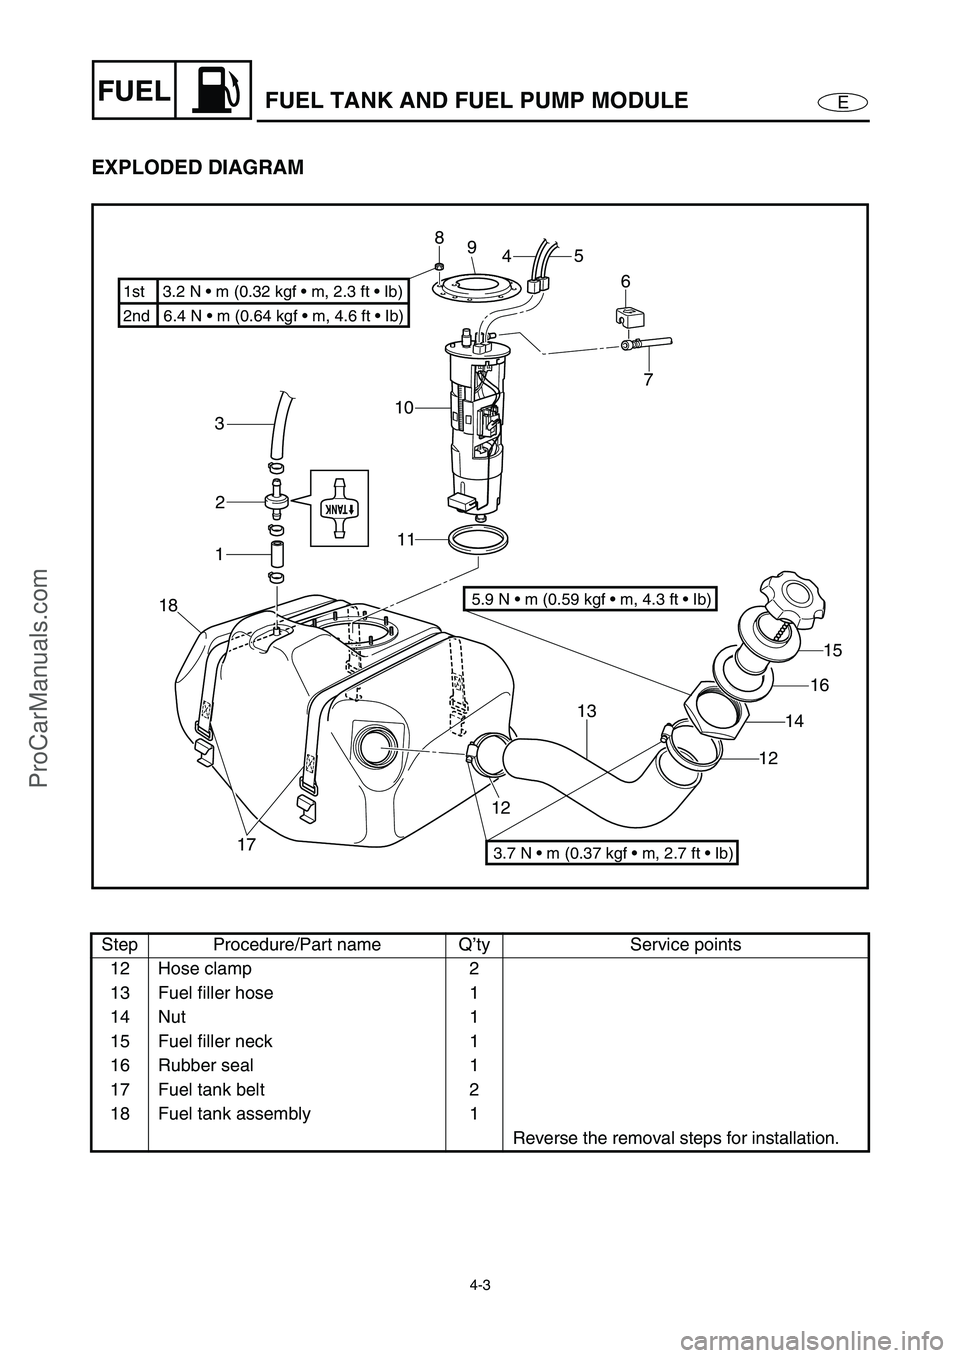 YAMAHA VX110 2005  Service Manual 4-3
EFUELFUEL TANK AND FUEL PUMP MODULE
EXPLODED DIAGRAM
Step Procedure/Part name Q’ty Service points
12 Hose clamp 2
13 Fuel filler hose 1
14 Nut 1
15 Fuel filler neck 1
16 Rubber seal 1
17 Fuel ta